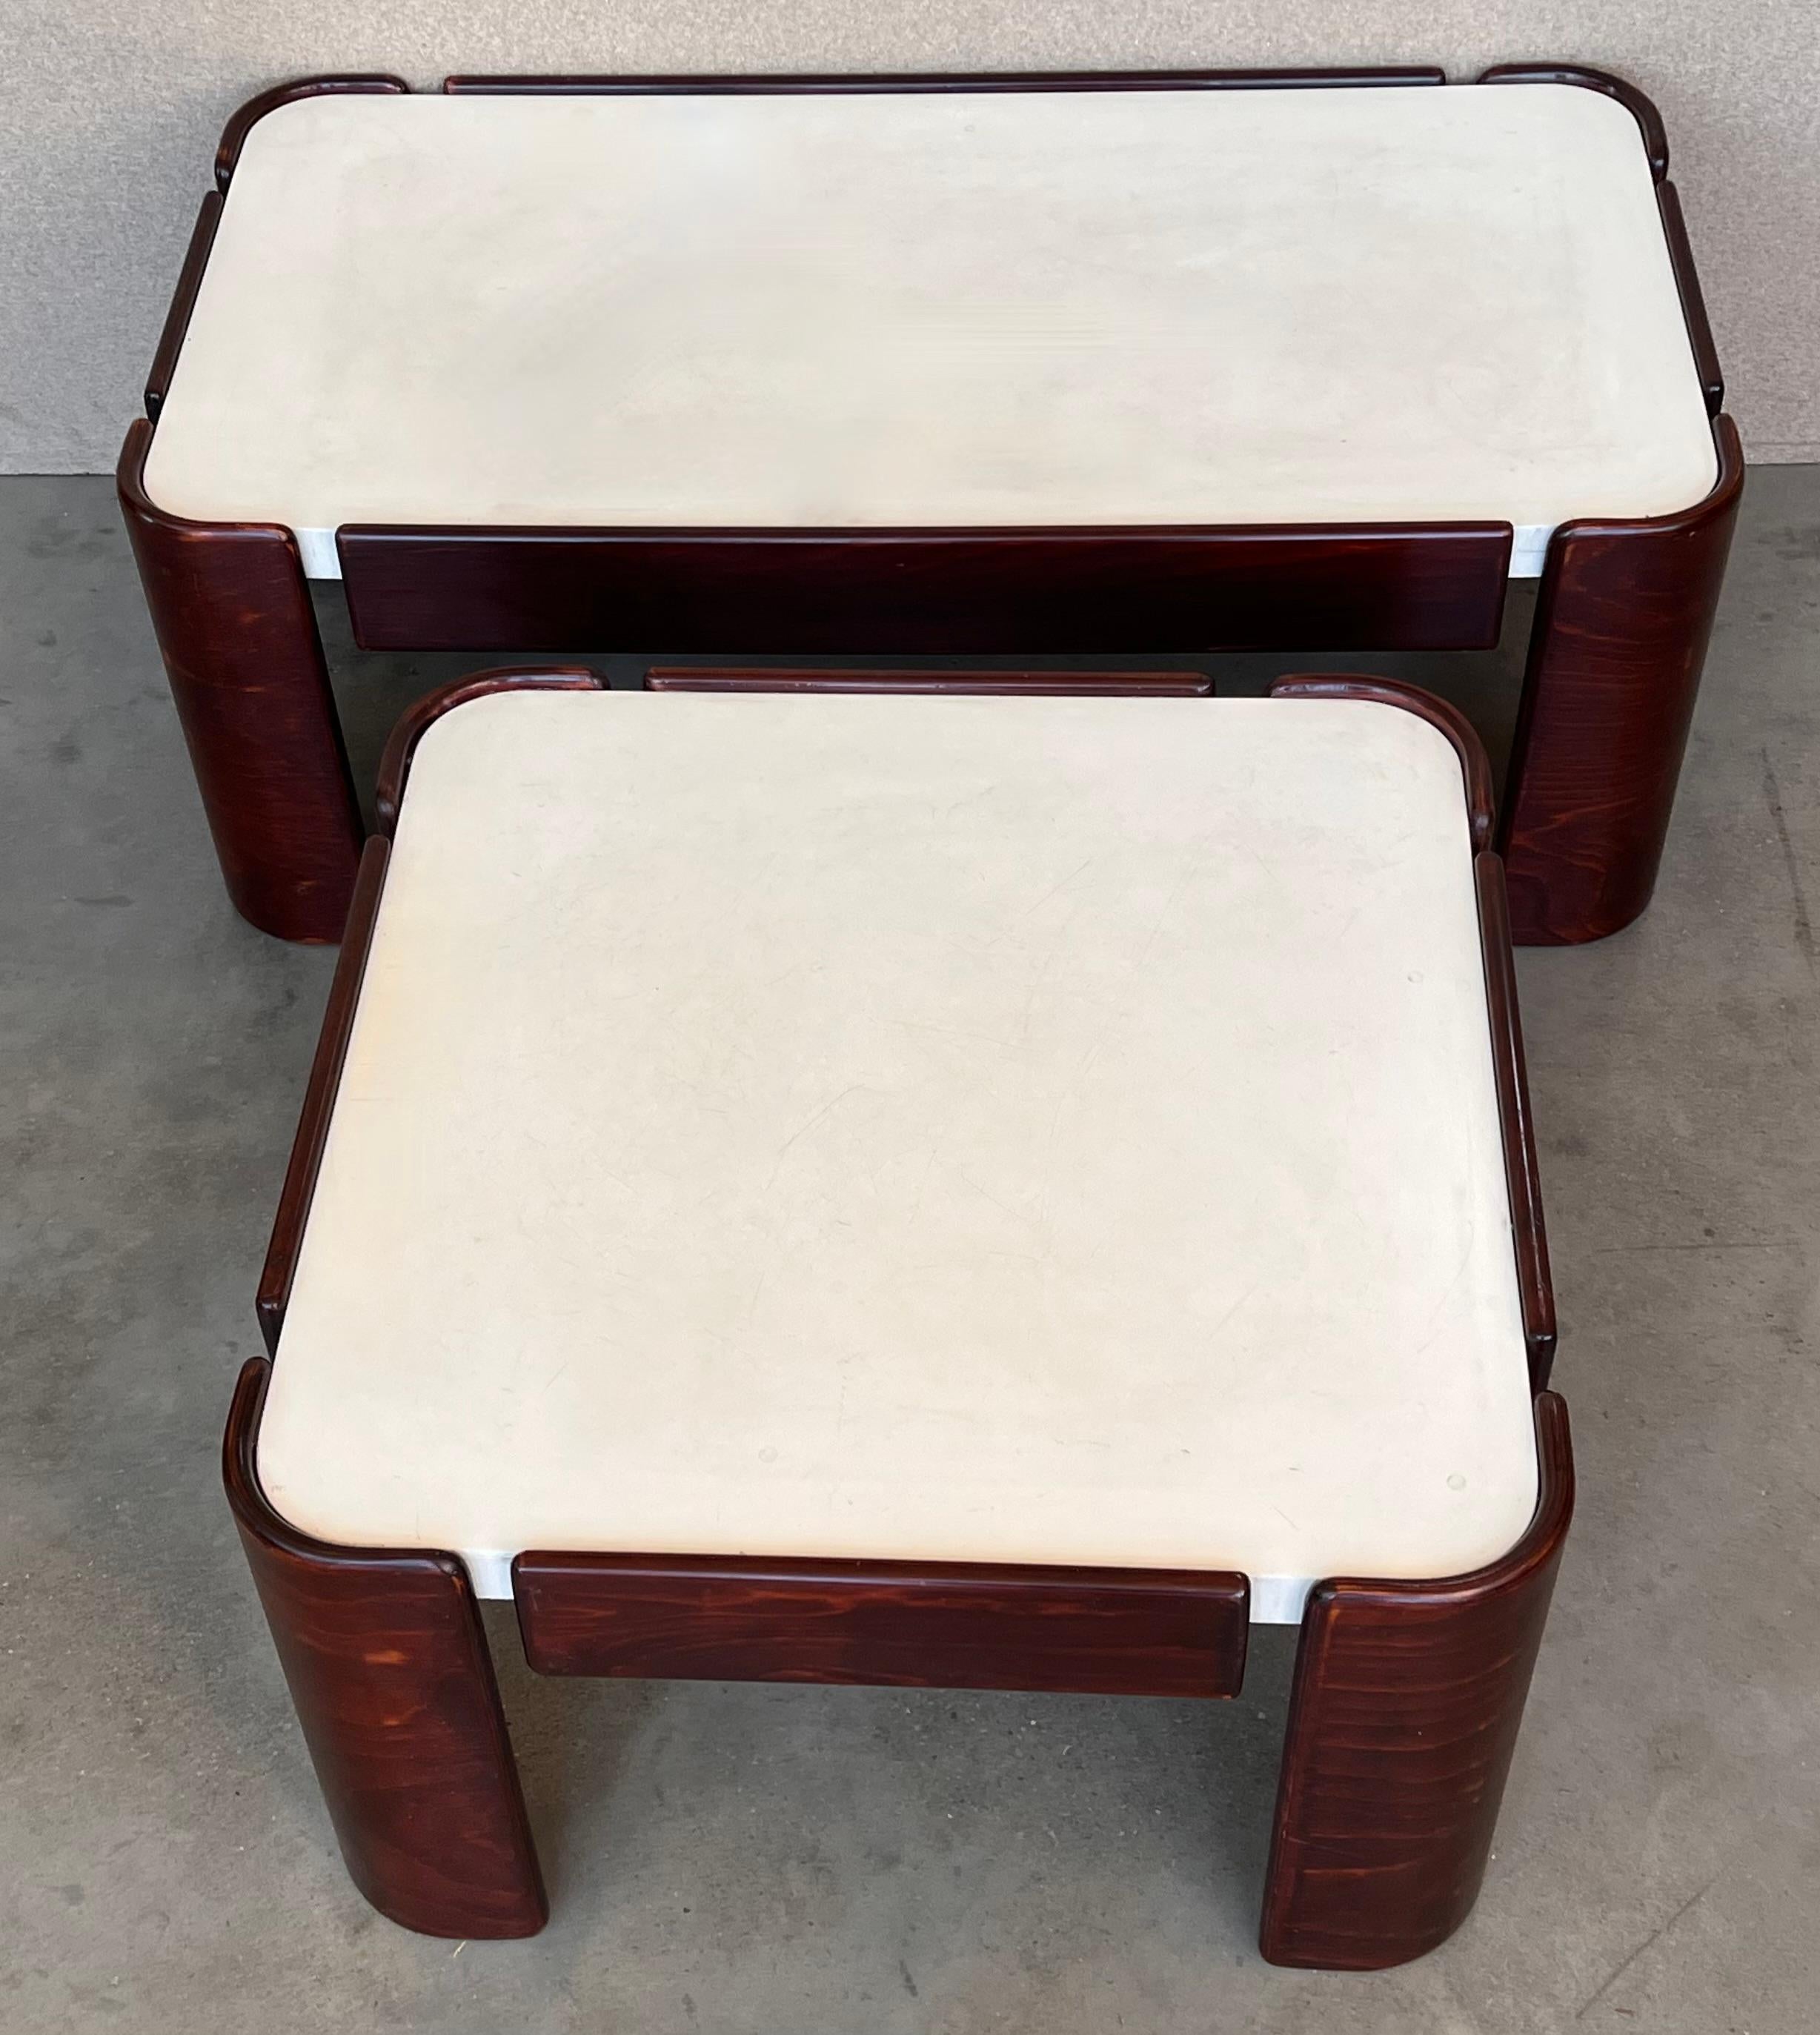 Mid-Century Modern Square Table with Curved Legs and White Top For Sale 2